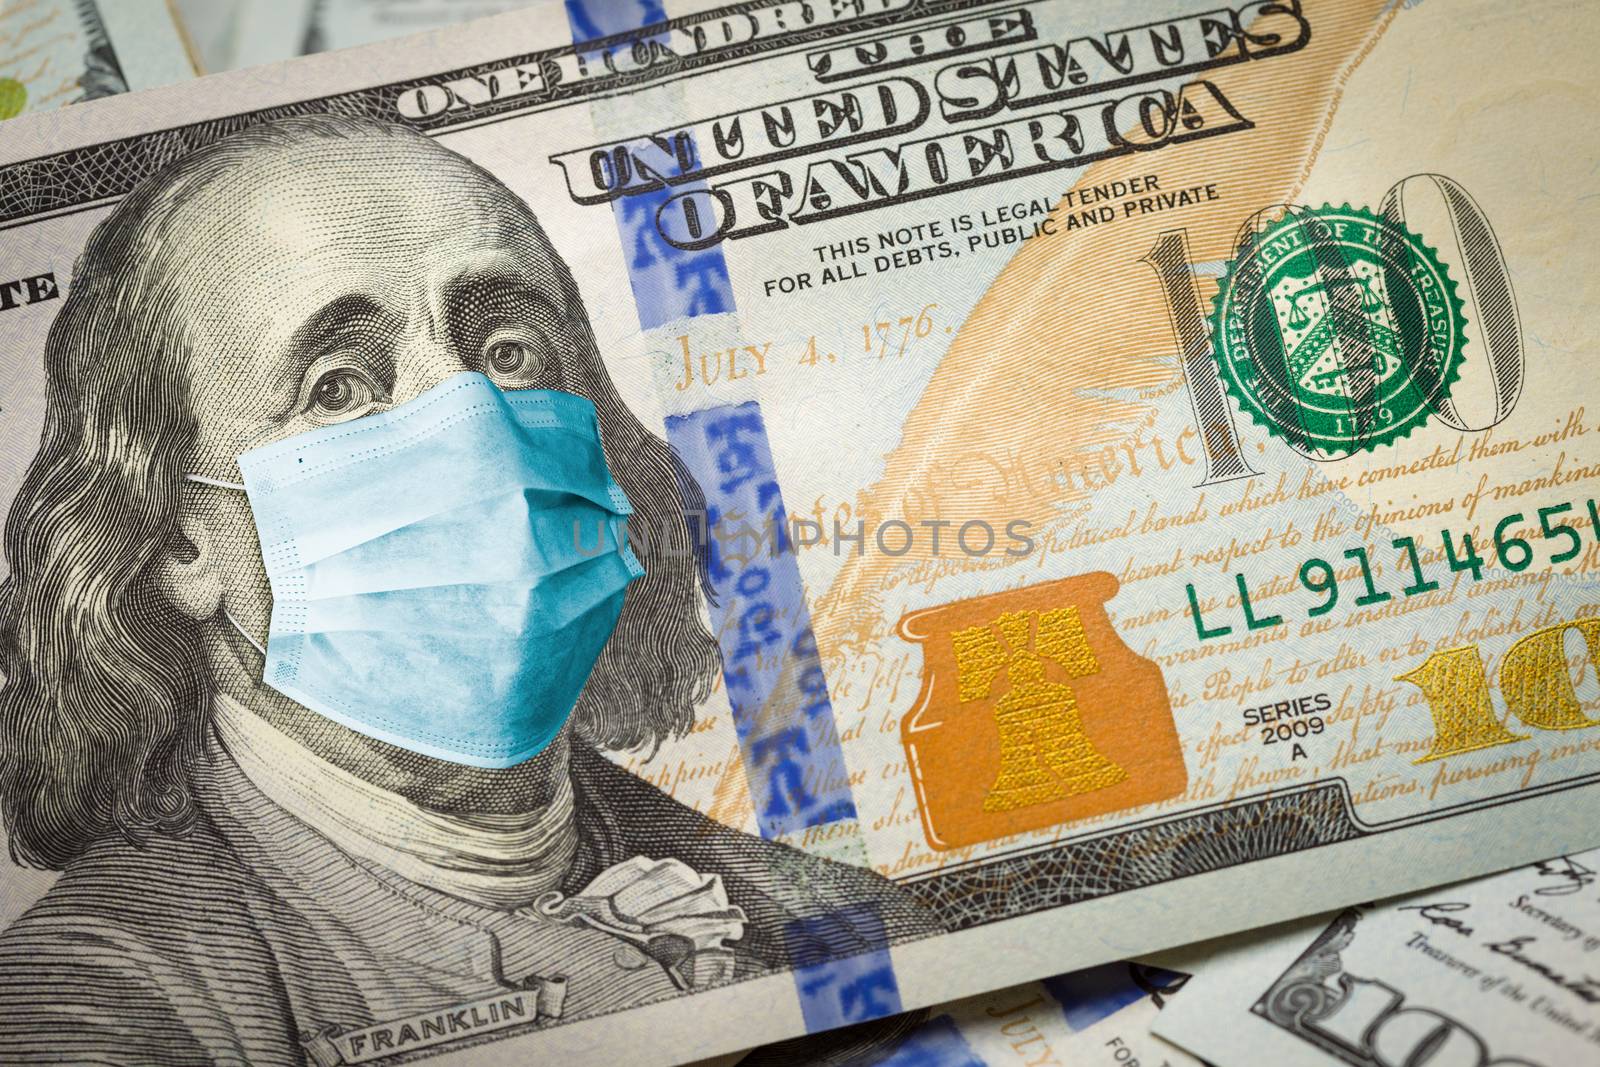 Benjamin Franklin With Worried and Concerned Expression Wearing Medical Face Mask On One Hundred Dollar Bill. by Feverpitched